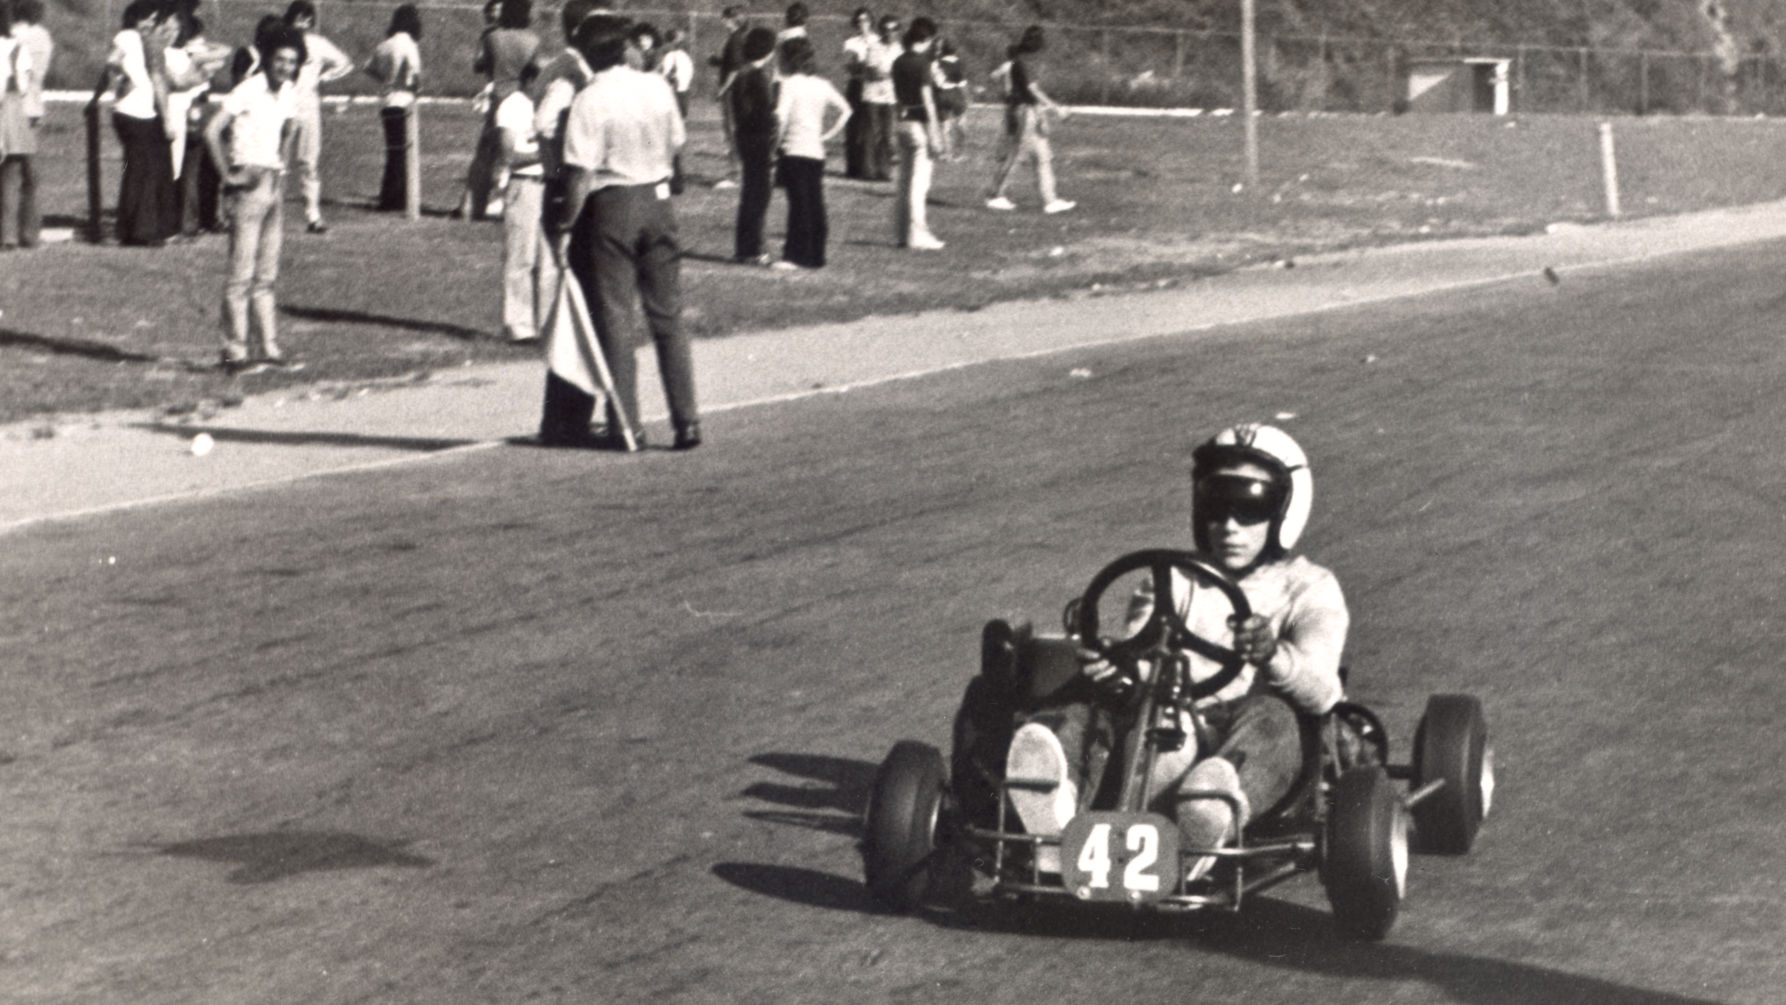 1973 - Ayrton wins his first official go-kart race at Interlagos, aged just 13. Photographer Credit Foto Família